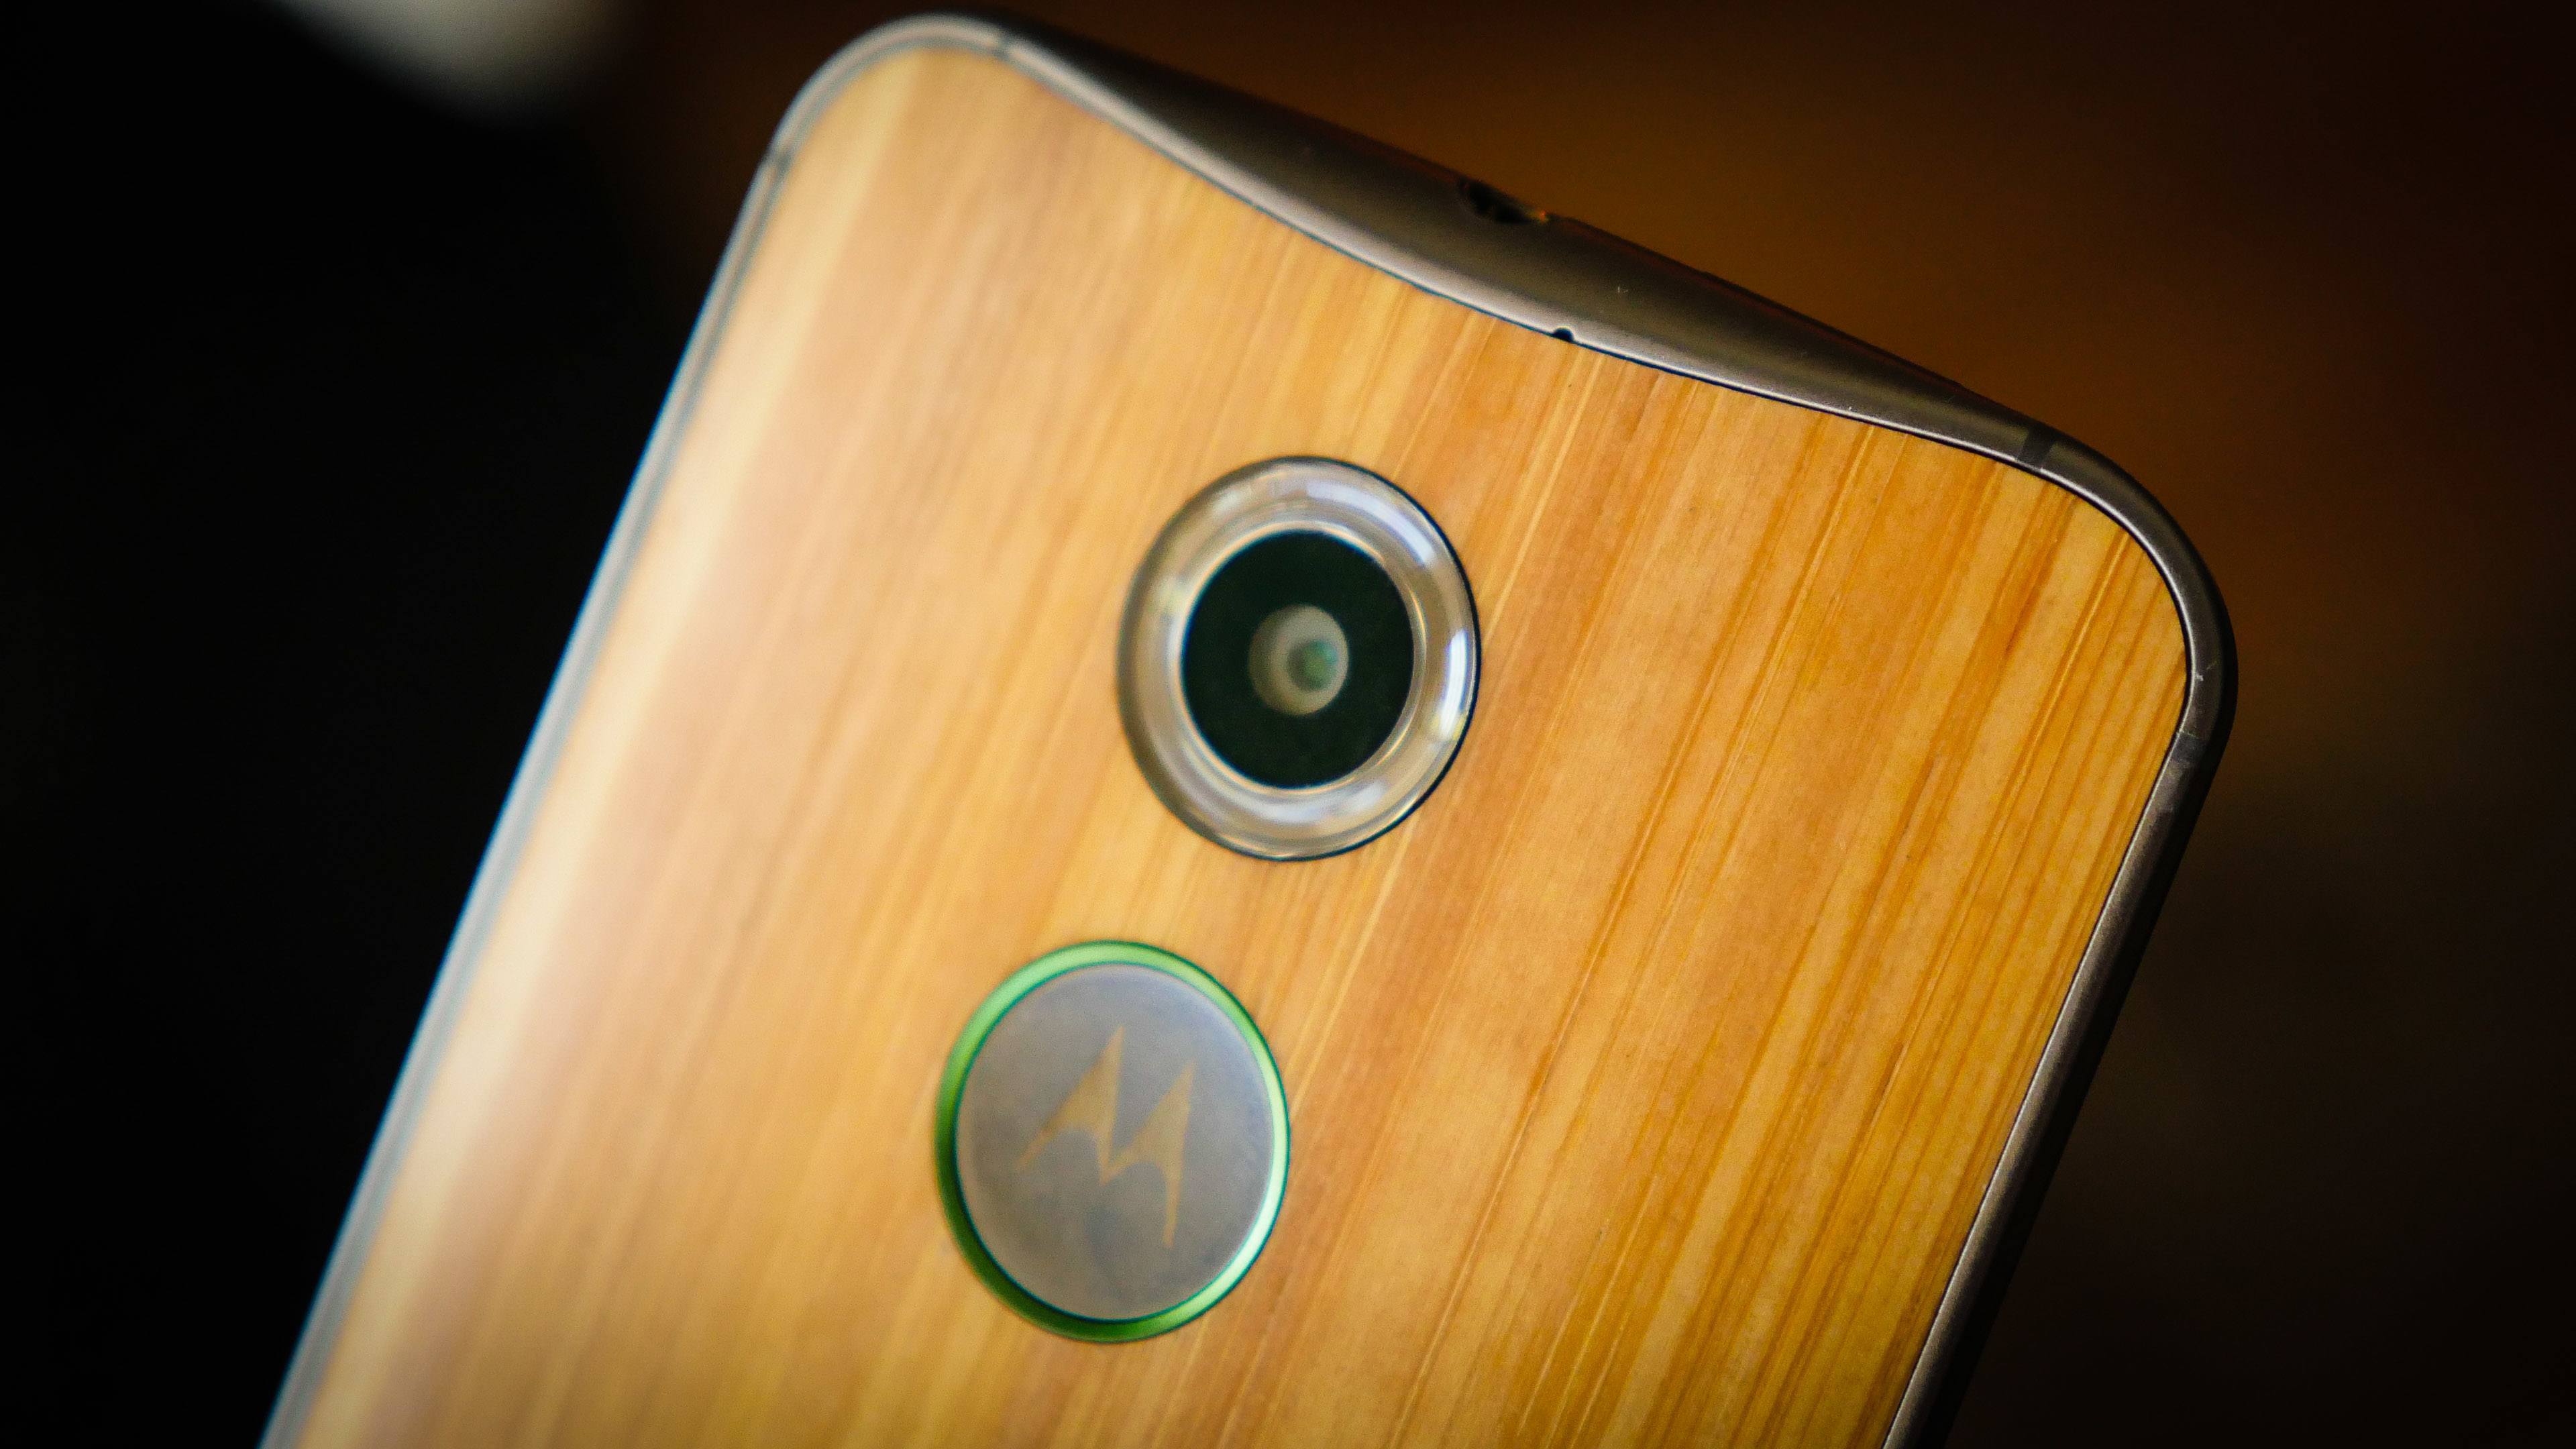 moto x 2014 first impressions (13 of 18)